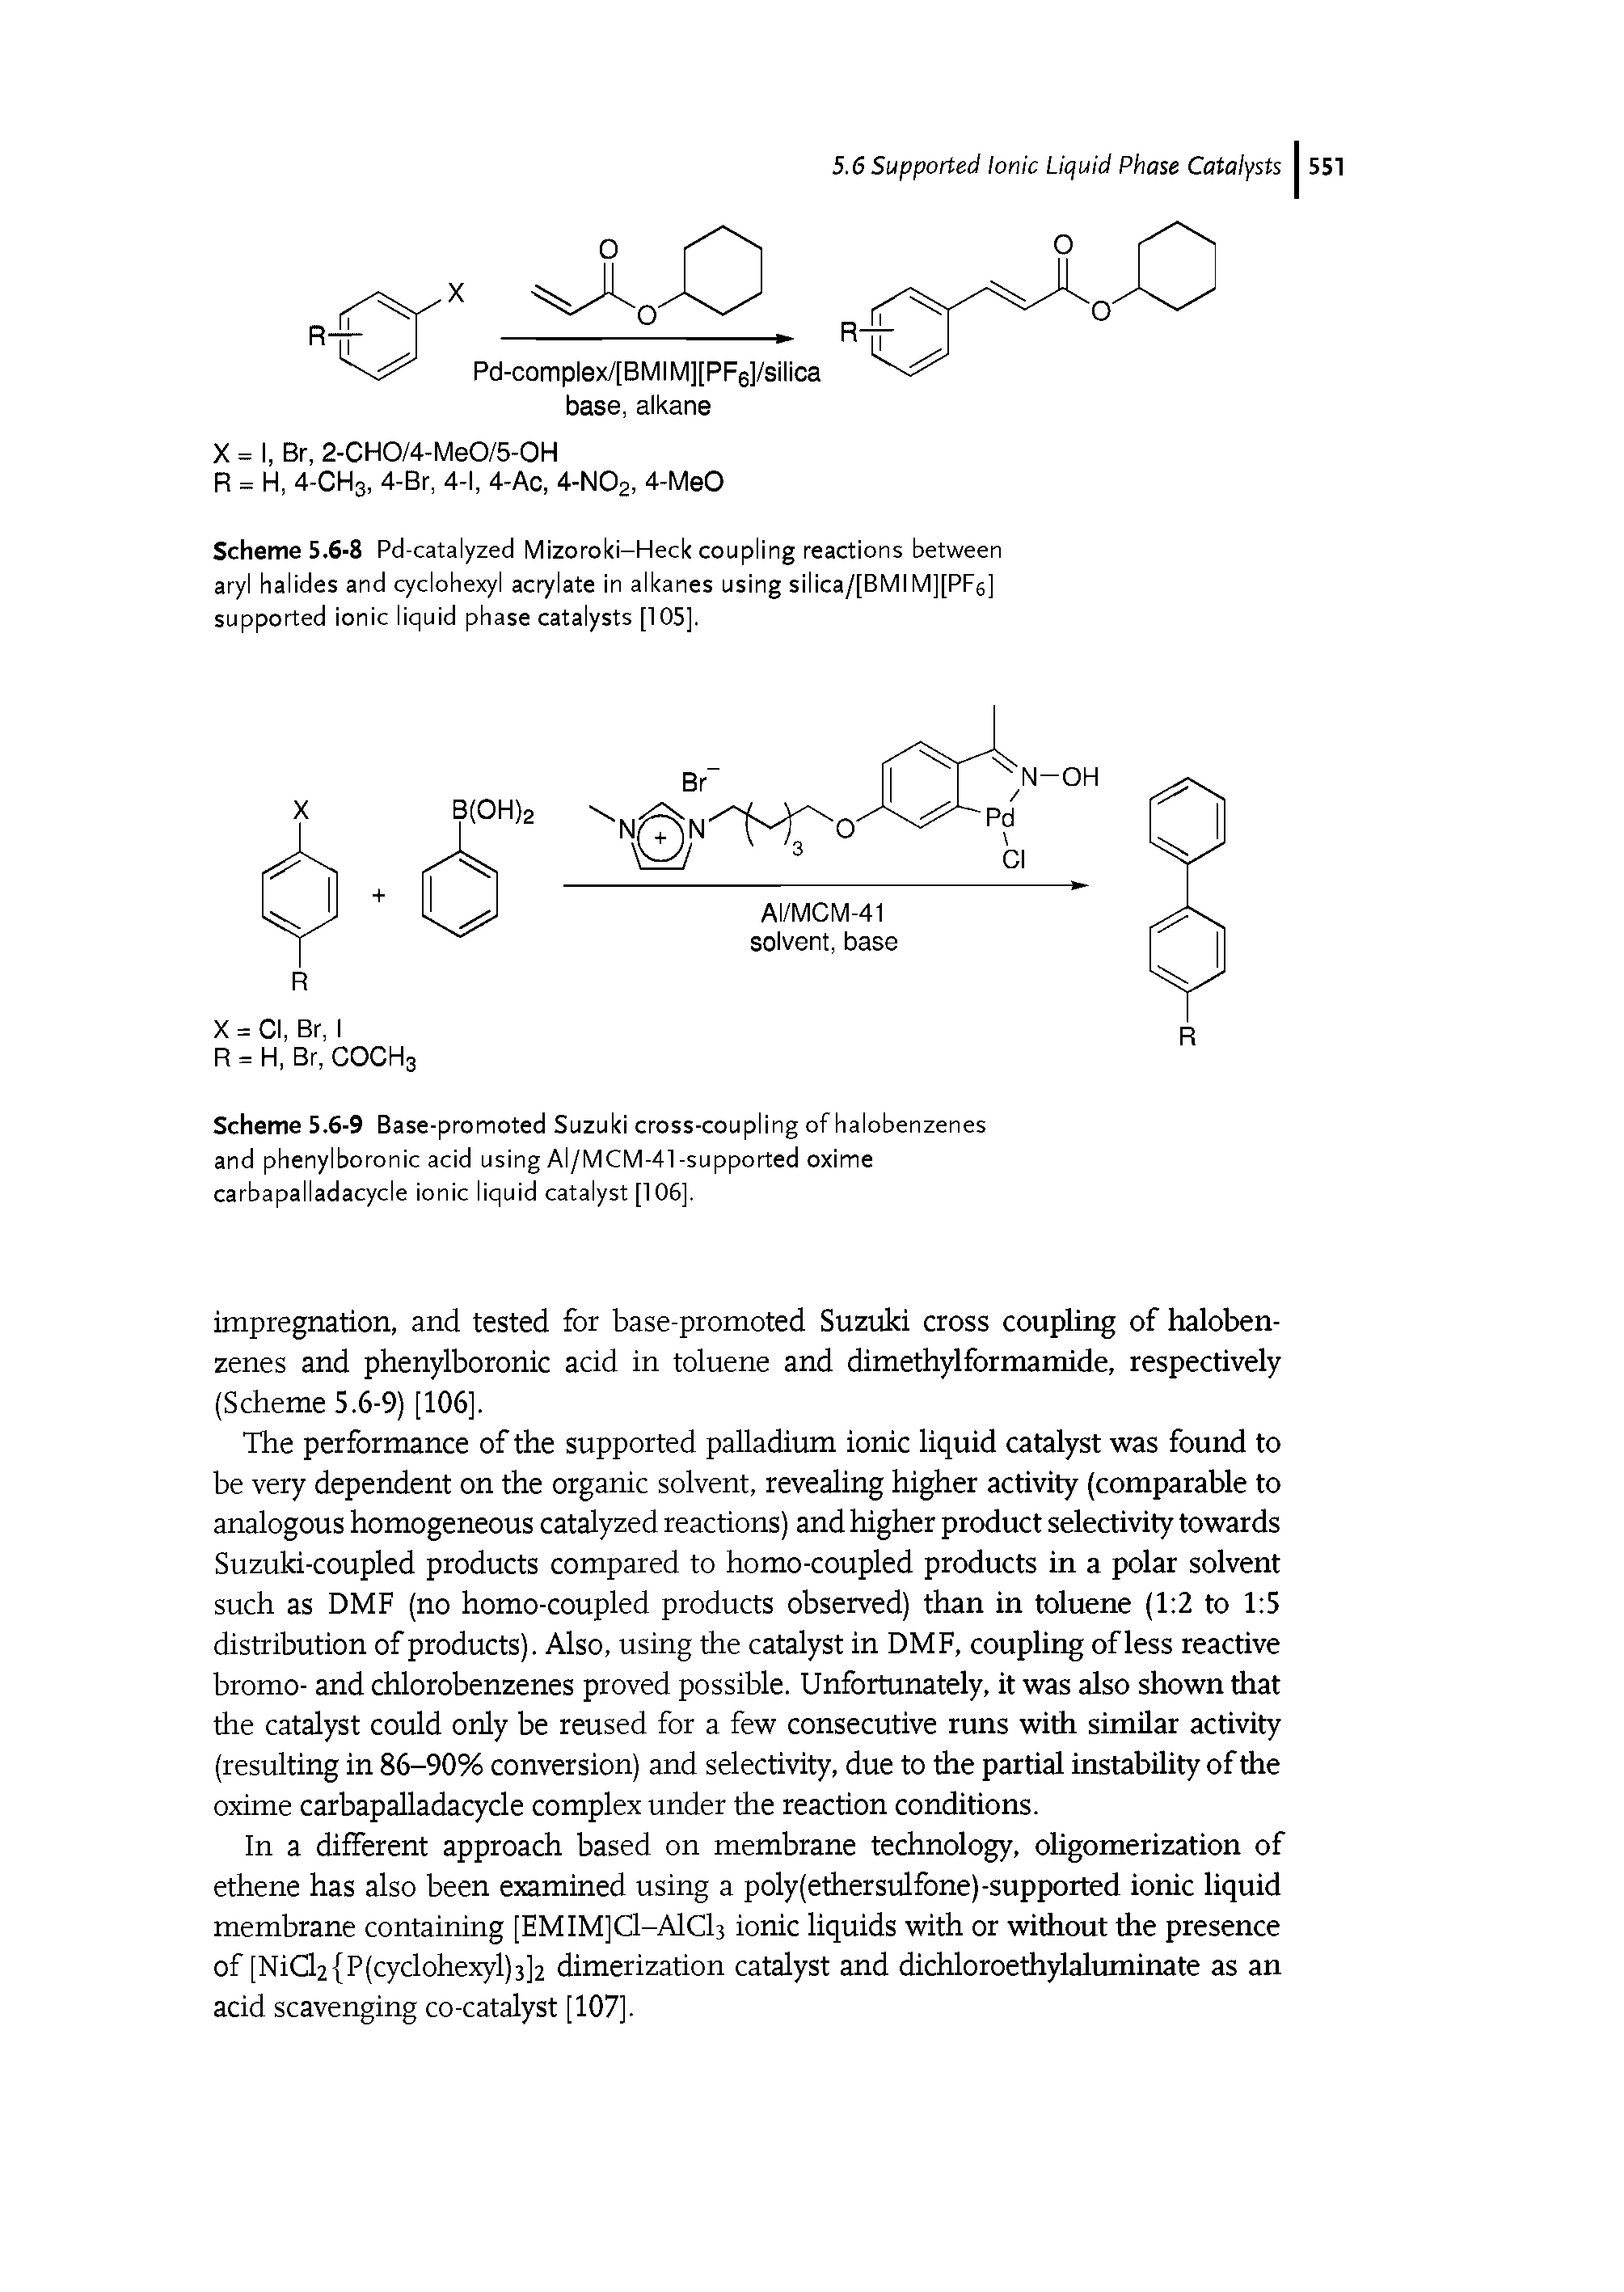 Scheme 5.6-8 Pd-catalyzed Mizoroki-Heck coupling reactions between aryl halides and cyclohexyl ac7late in alkanes using silica/[BMIM][PF6] supported ionic liquid phase catalysts [105].